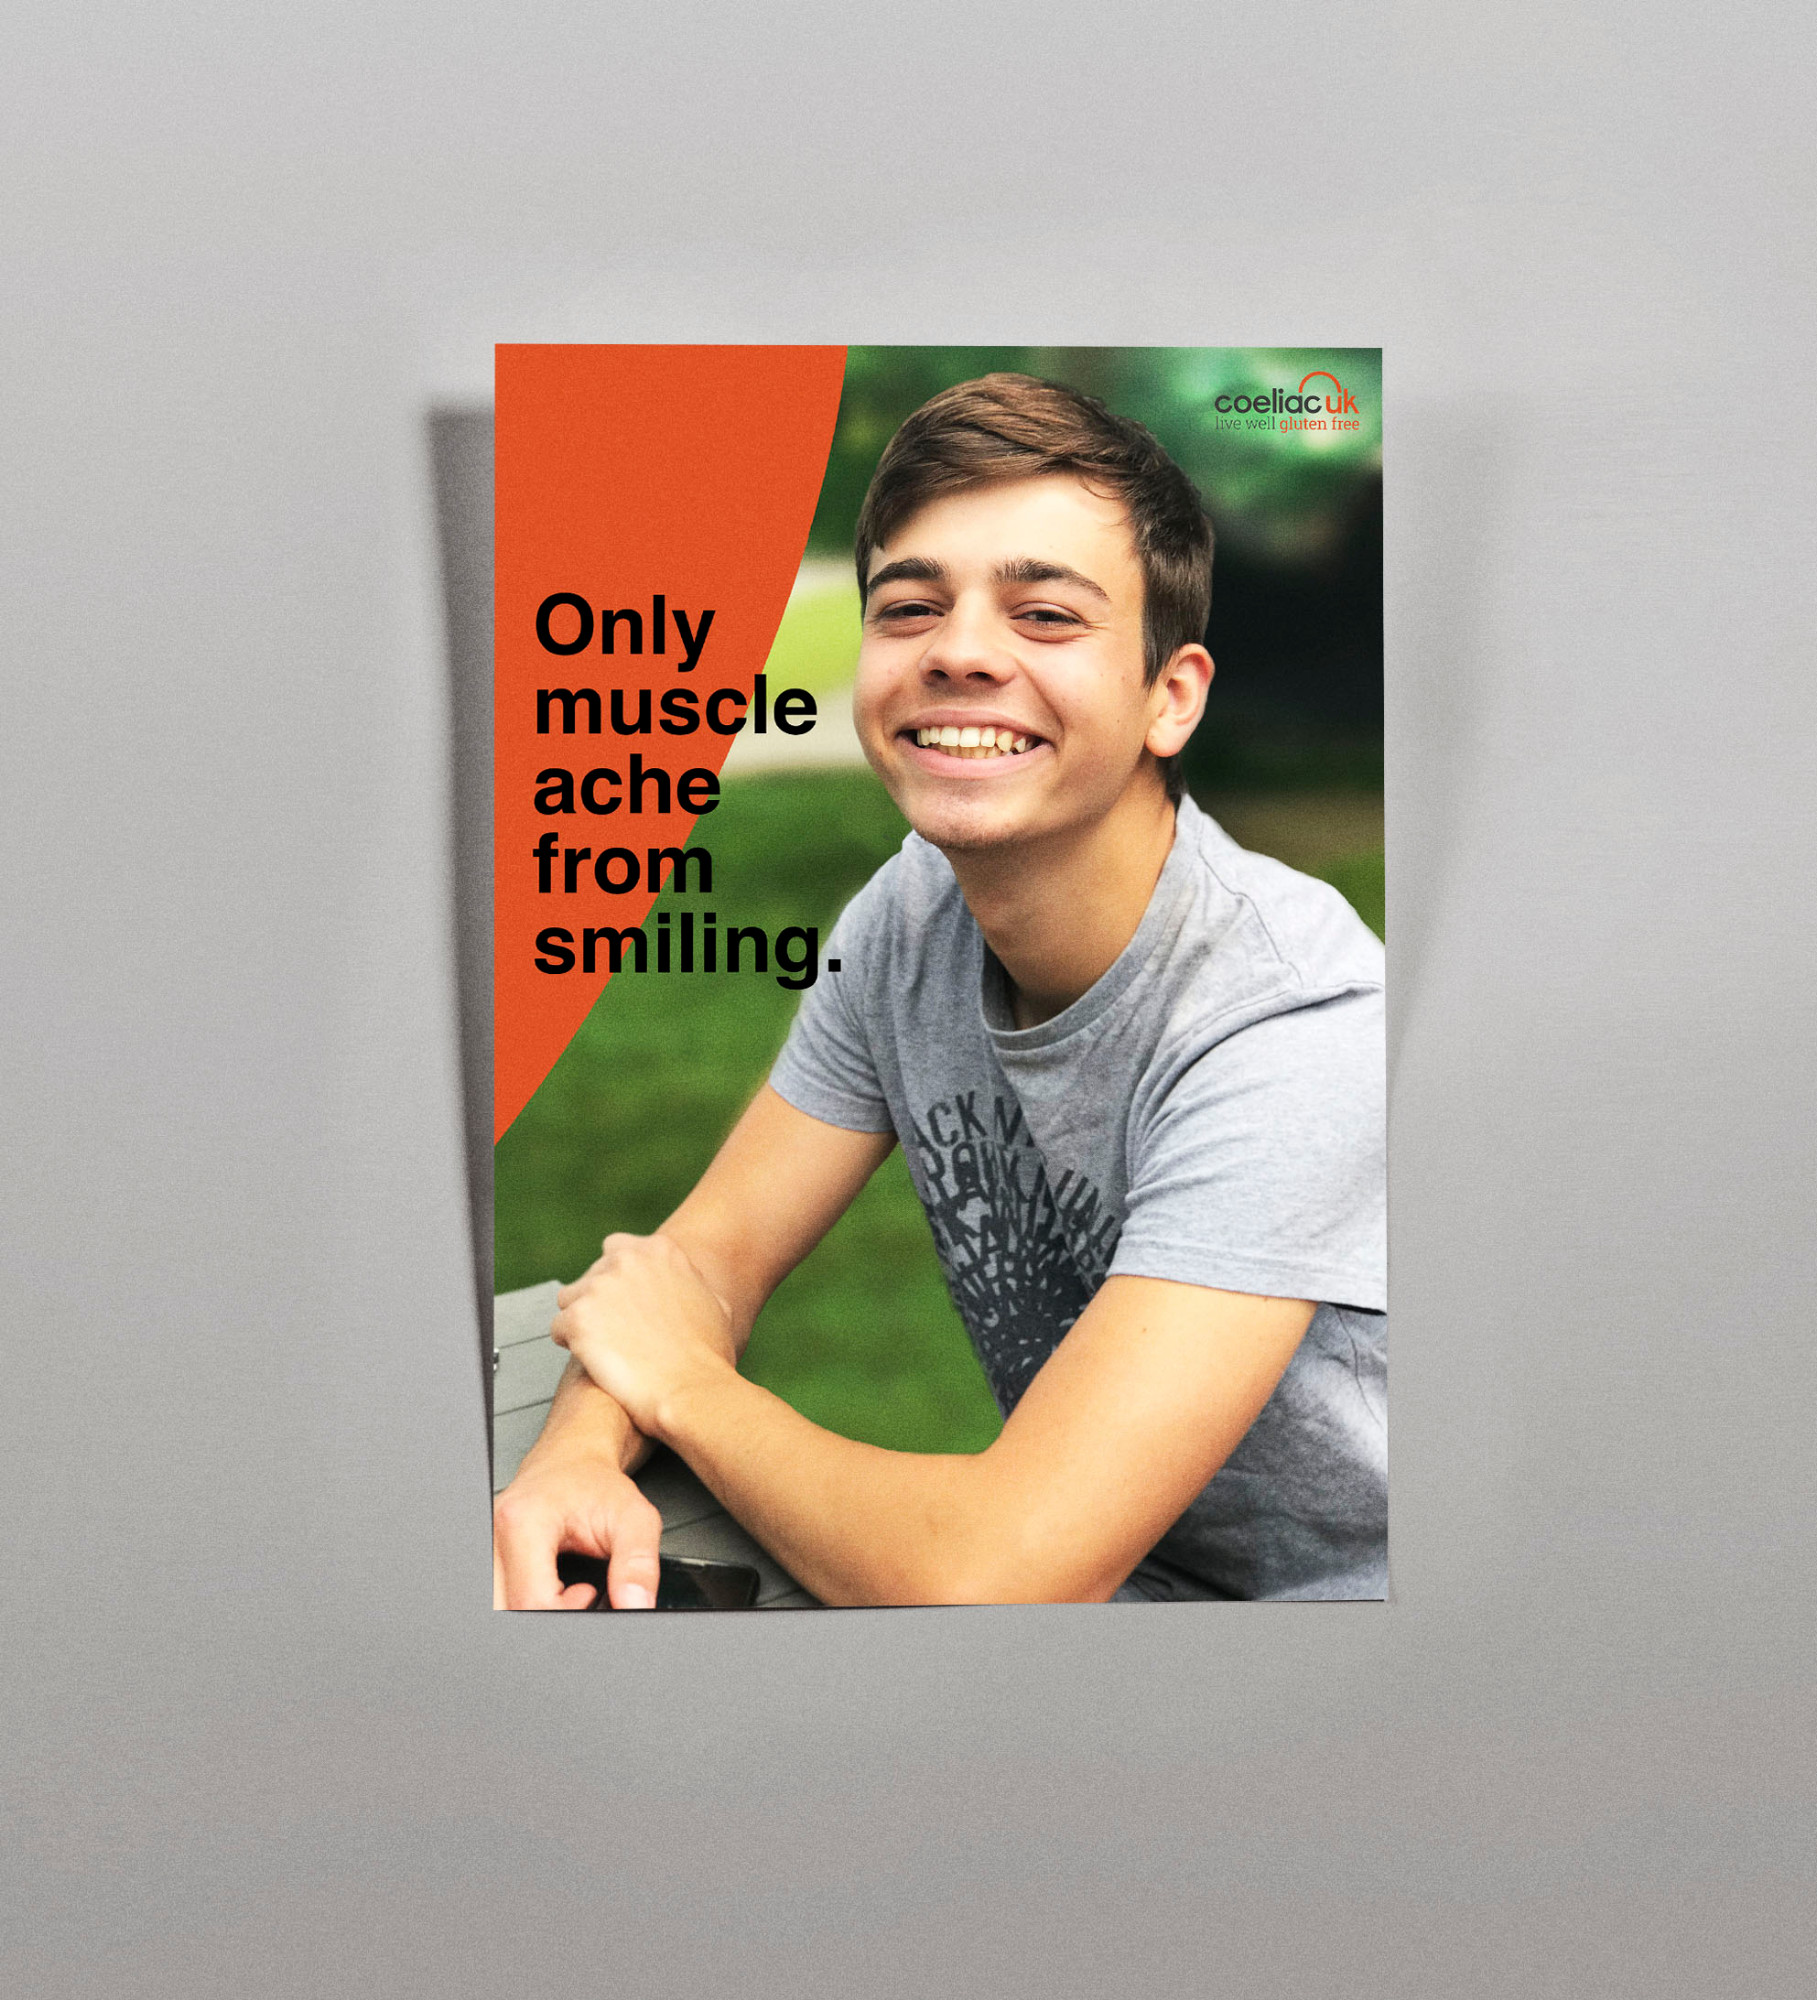 "Only muscle ache from smiling". A poster that expresses the happiness felt by someone after being diagnosed with Coeliac disease, as they begin to feel better again.